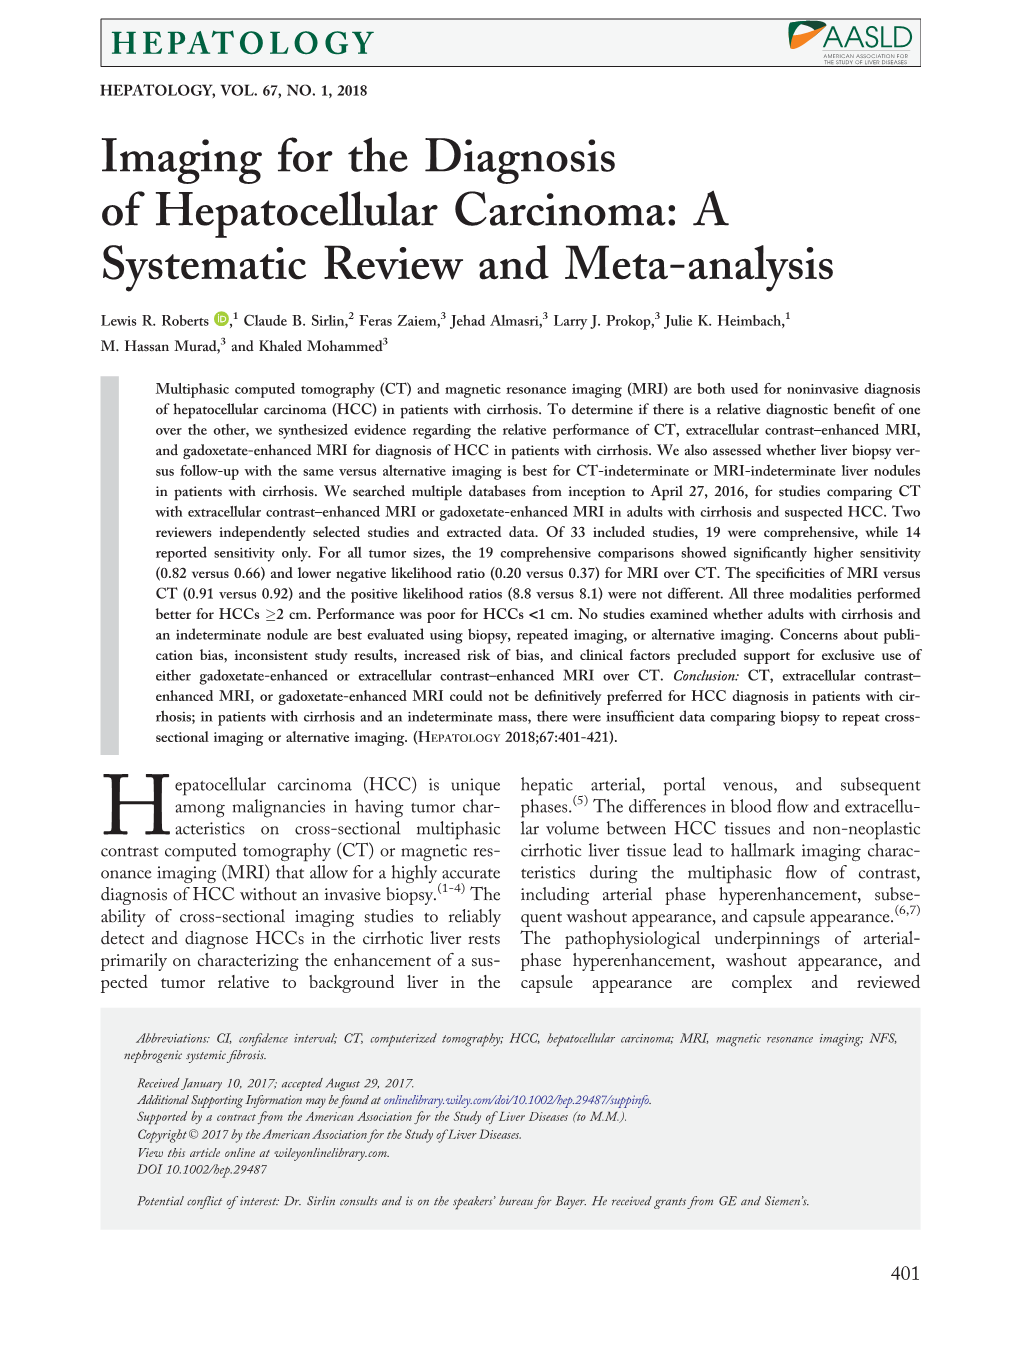 Imaging for the Diagnosis of Hepatocellular Carcinoma: a Systematic Review and Meta-Analysis